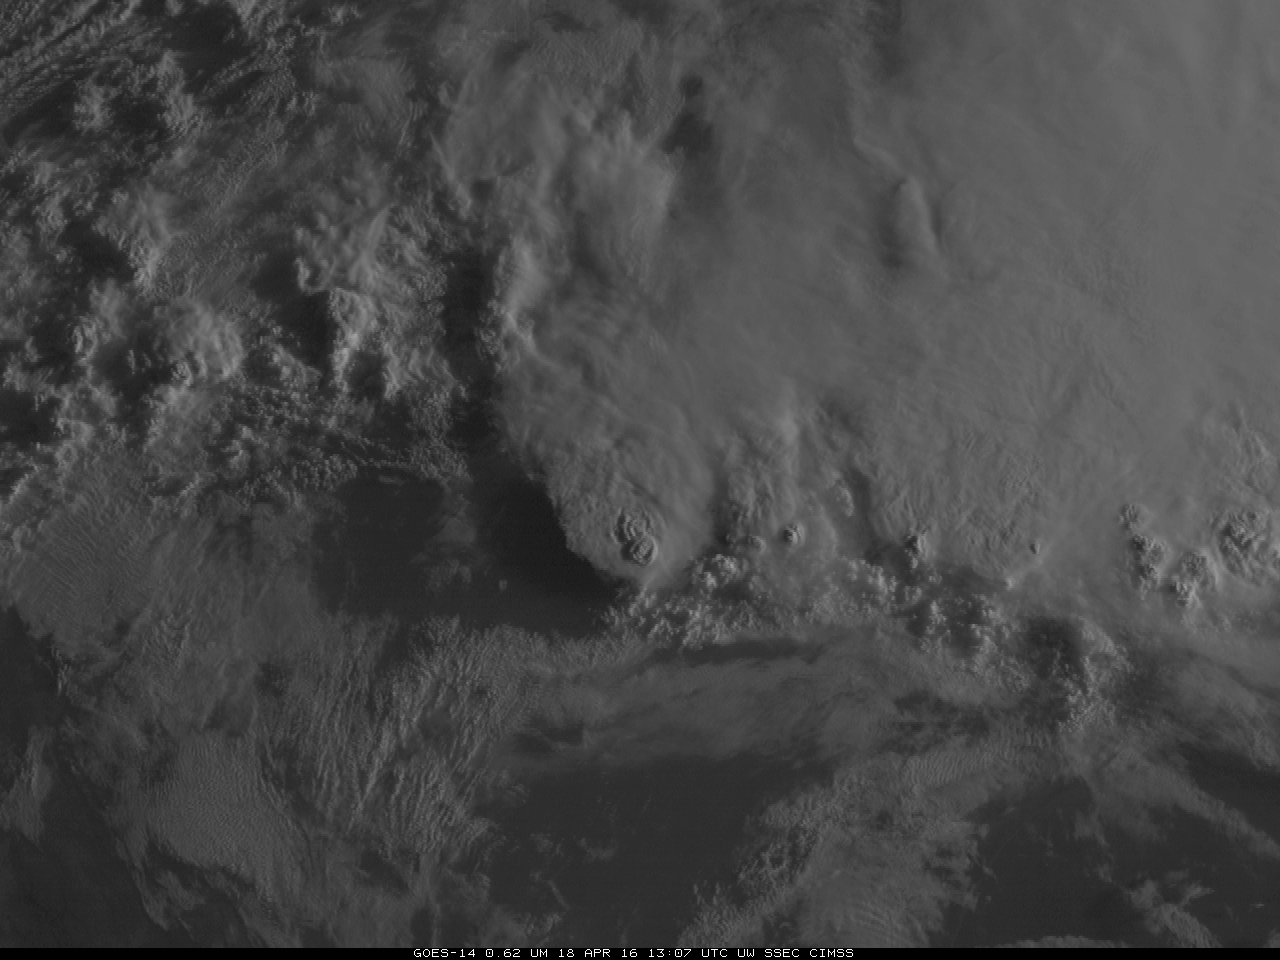 GOES-14 0.62 µm Visible Imagery, 18 April 2016 [click to play animation]